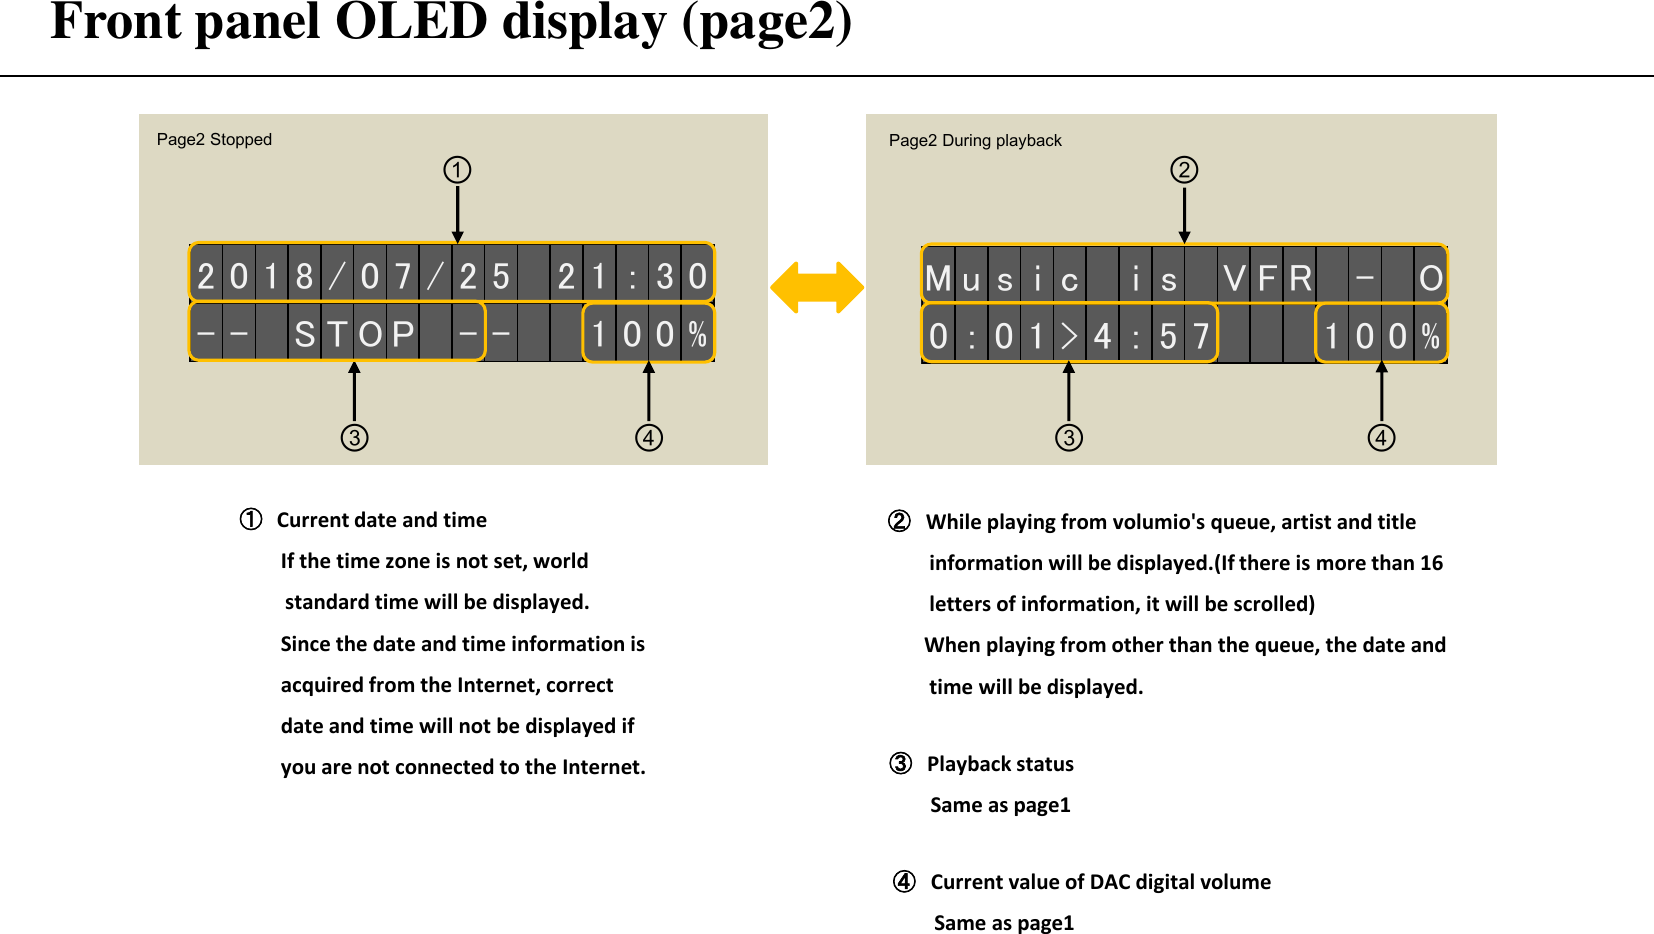 Front panel OLED display (page2) Page2 Stopped ④ Current value of DAC digital volume                     Same as page1 Page2 During playback 2018/07/25  21 : 30- - S T O P   - - 1 0 0 %① ③ ④ Mu s i c i s V F R   - O0 : 0 1 &gt; 4 : 5 7 1 0 0 %③ ② ④ ①Current date and time         If the time zone is not set, world       standard time will be displayed.         Since the date and time information is            acquired from the Internet, correct         date and time will not be displayed if         you are not connected to the Internet. ② While playing from volumio&apos;s queue, artist and title               information will be displayed.(If there is more than 16            letters of information, it will be scrolled)        When playing from other than the queue, the date and          time will be displayed.    ③ Playback status          Same as page1 